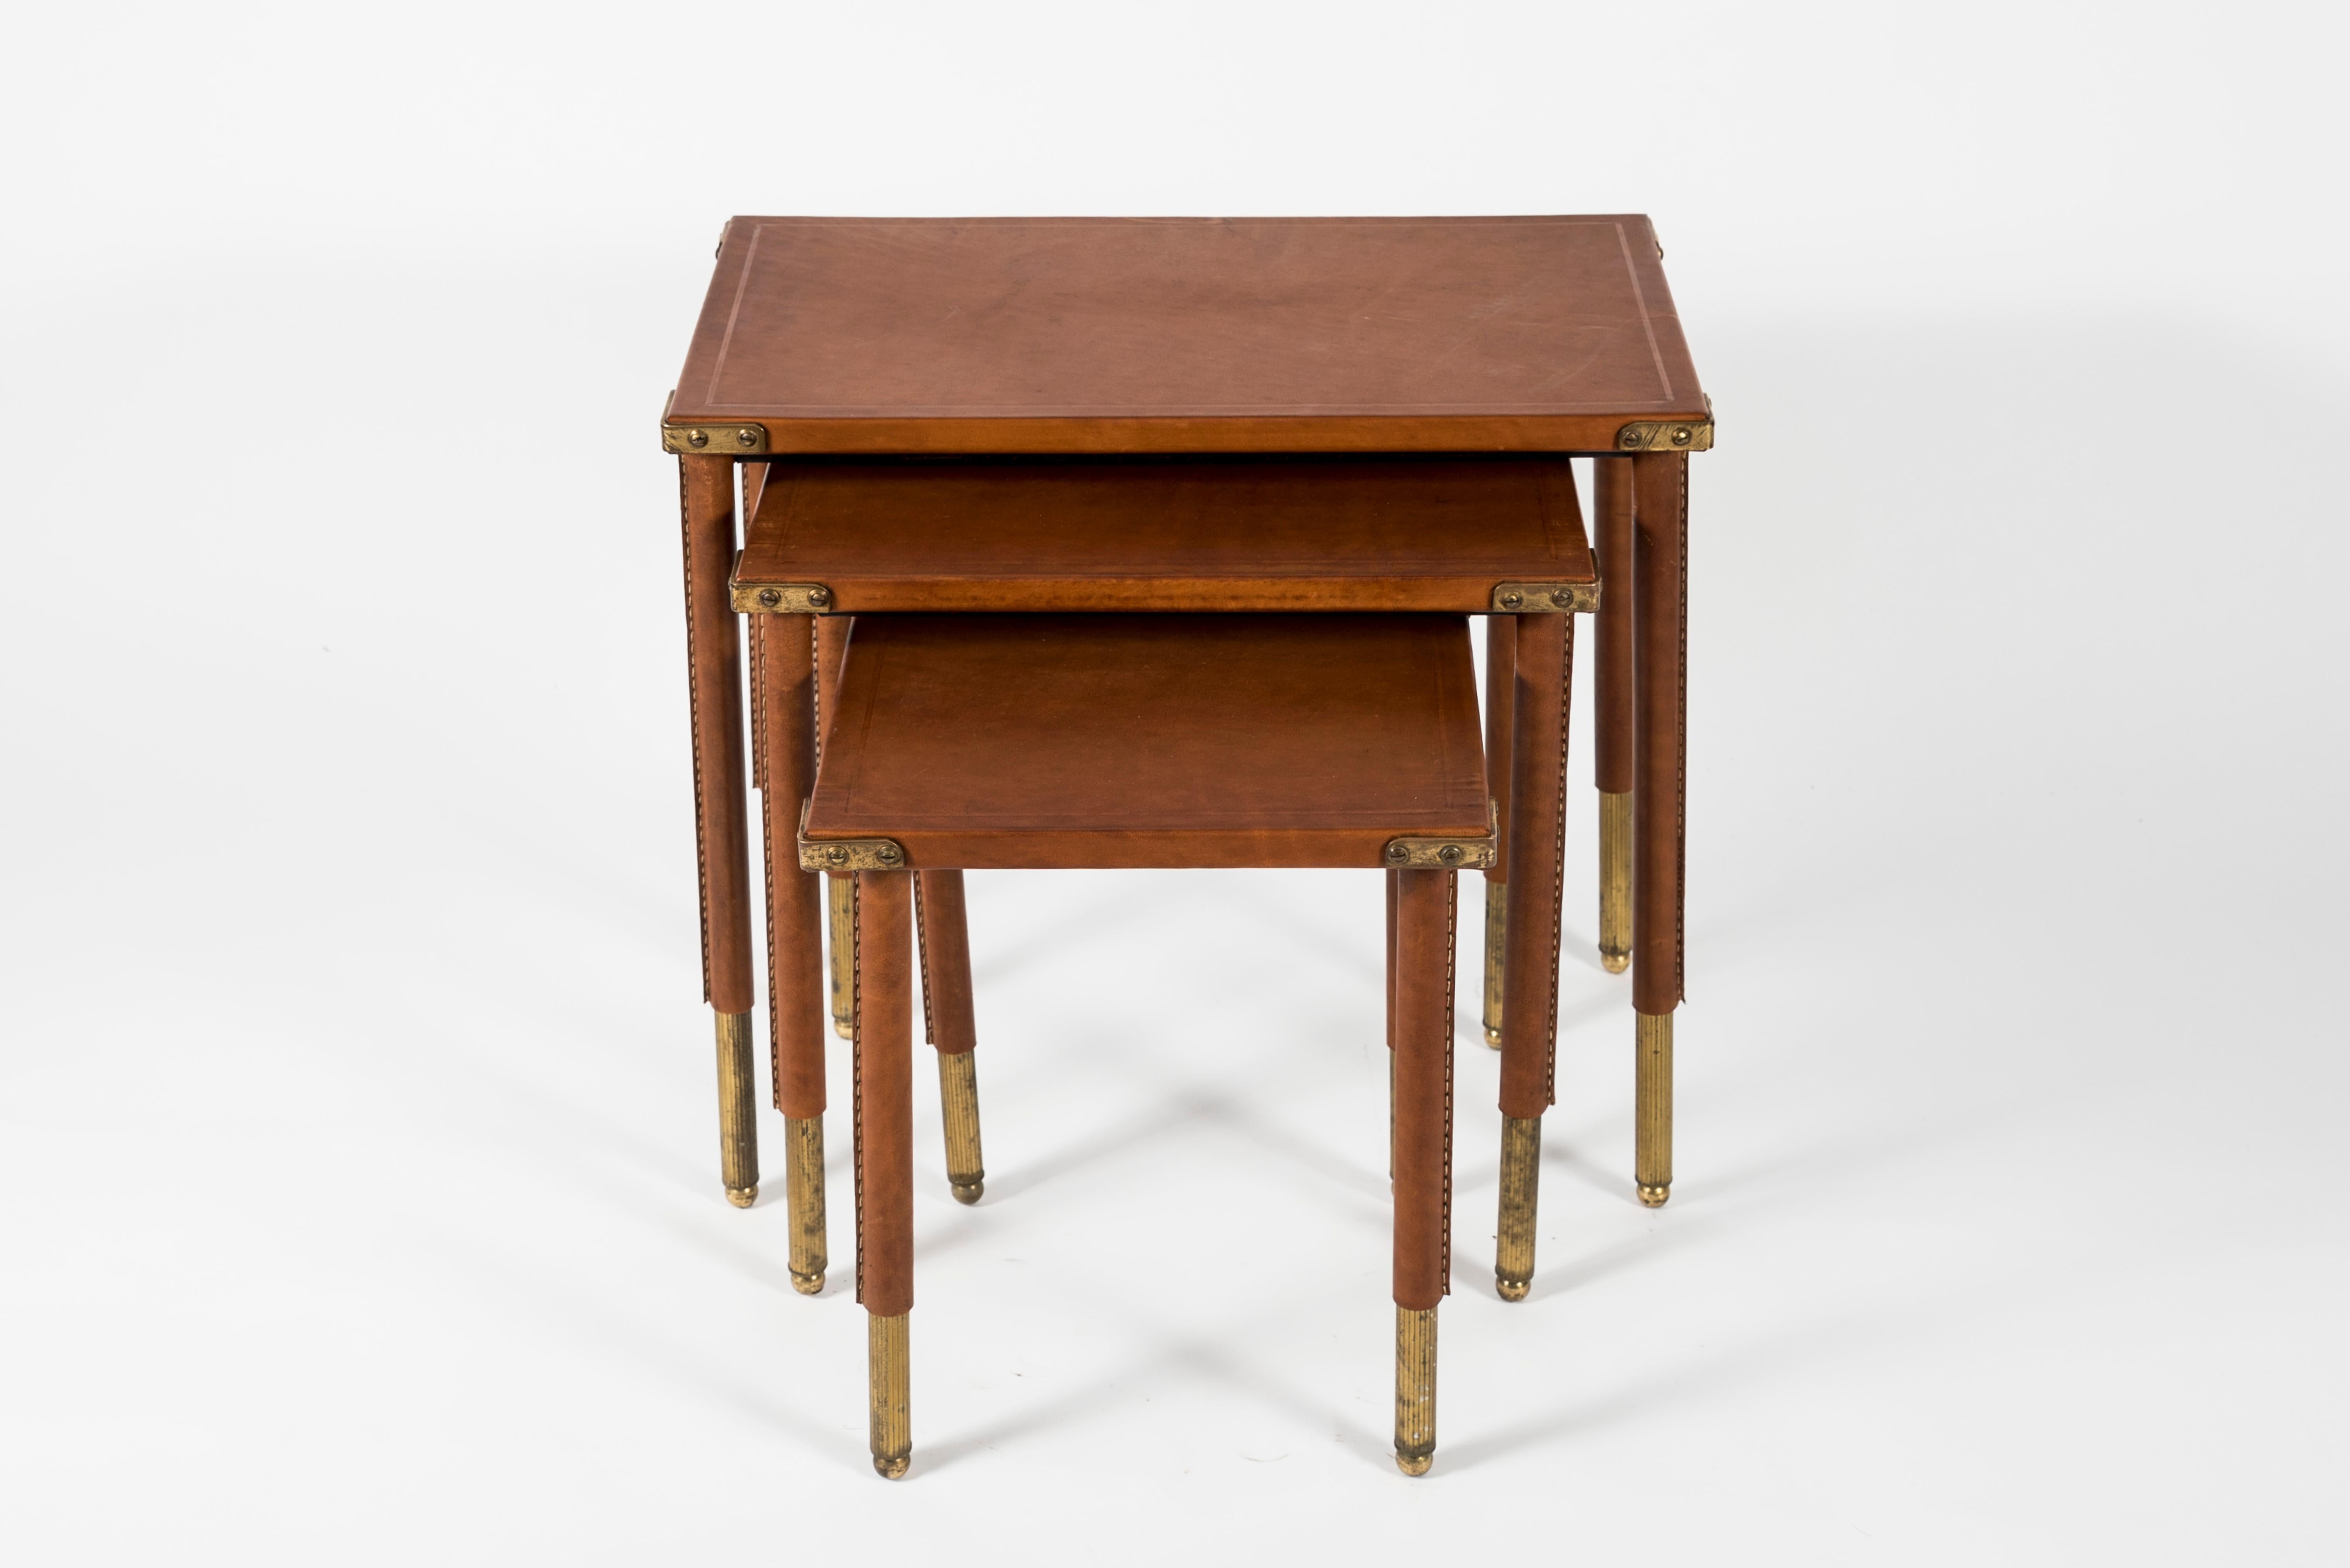 Set of nesting tables covered with stitched leather by Jacques Adnet
France,
1950
Dimensions are:
30 x 30 x 37 cm
30 x 30 x 42 cm
51 x 30 x 39 cm.